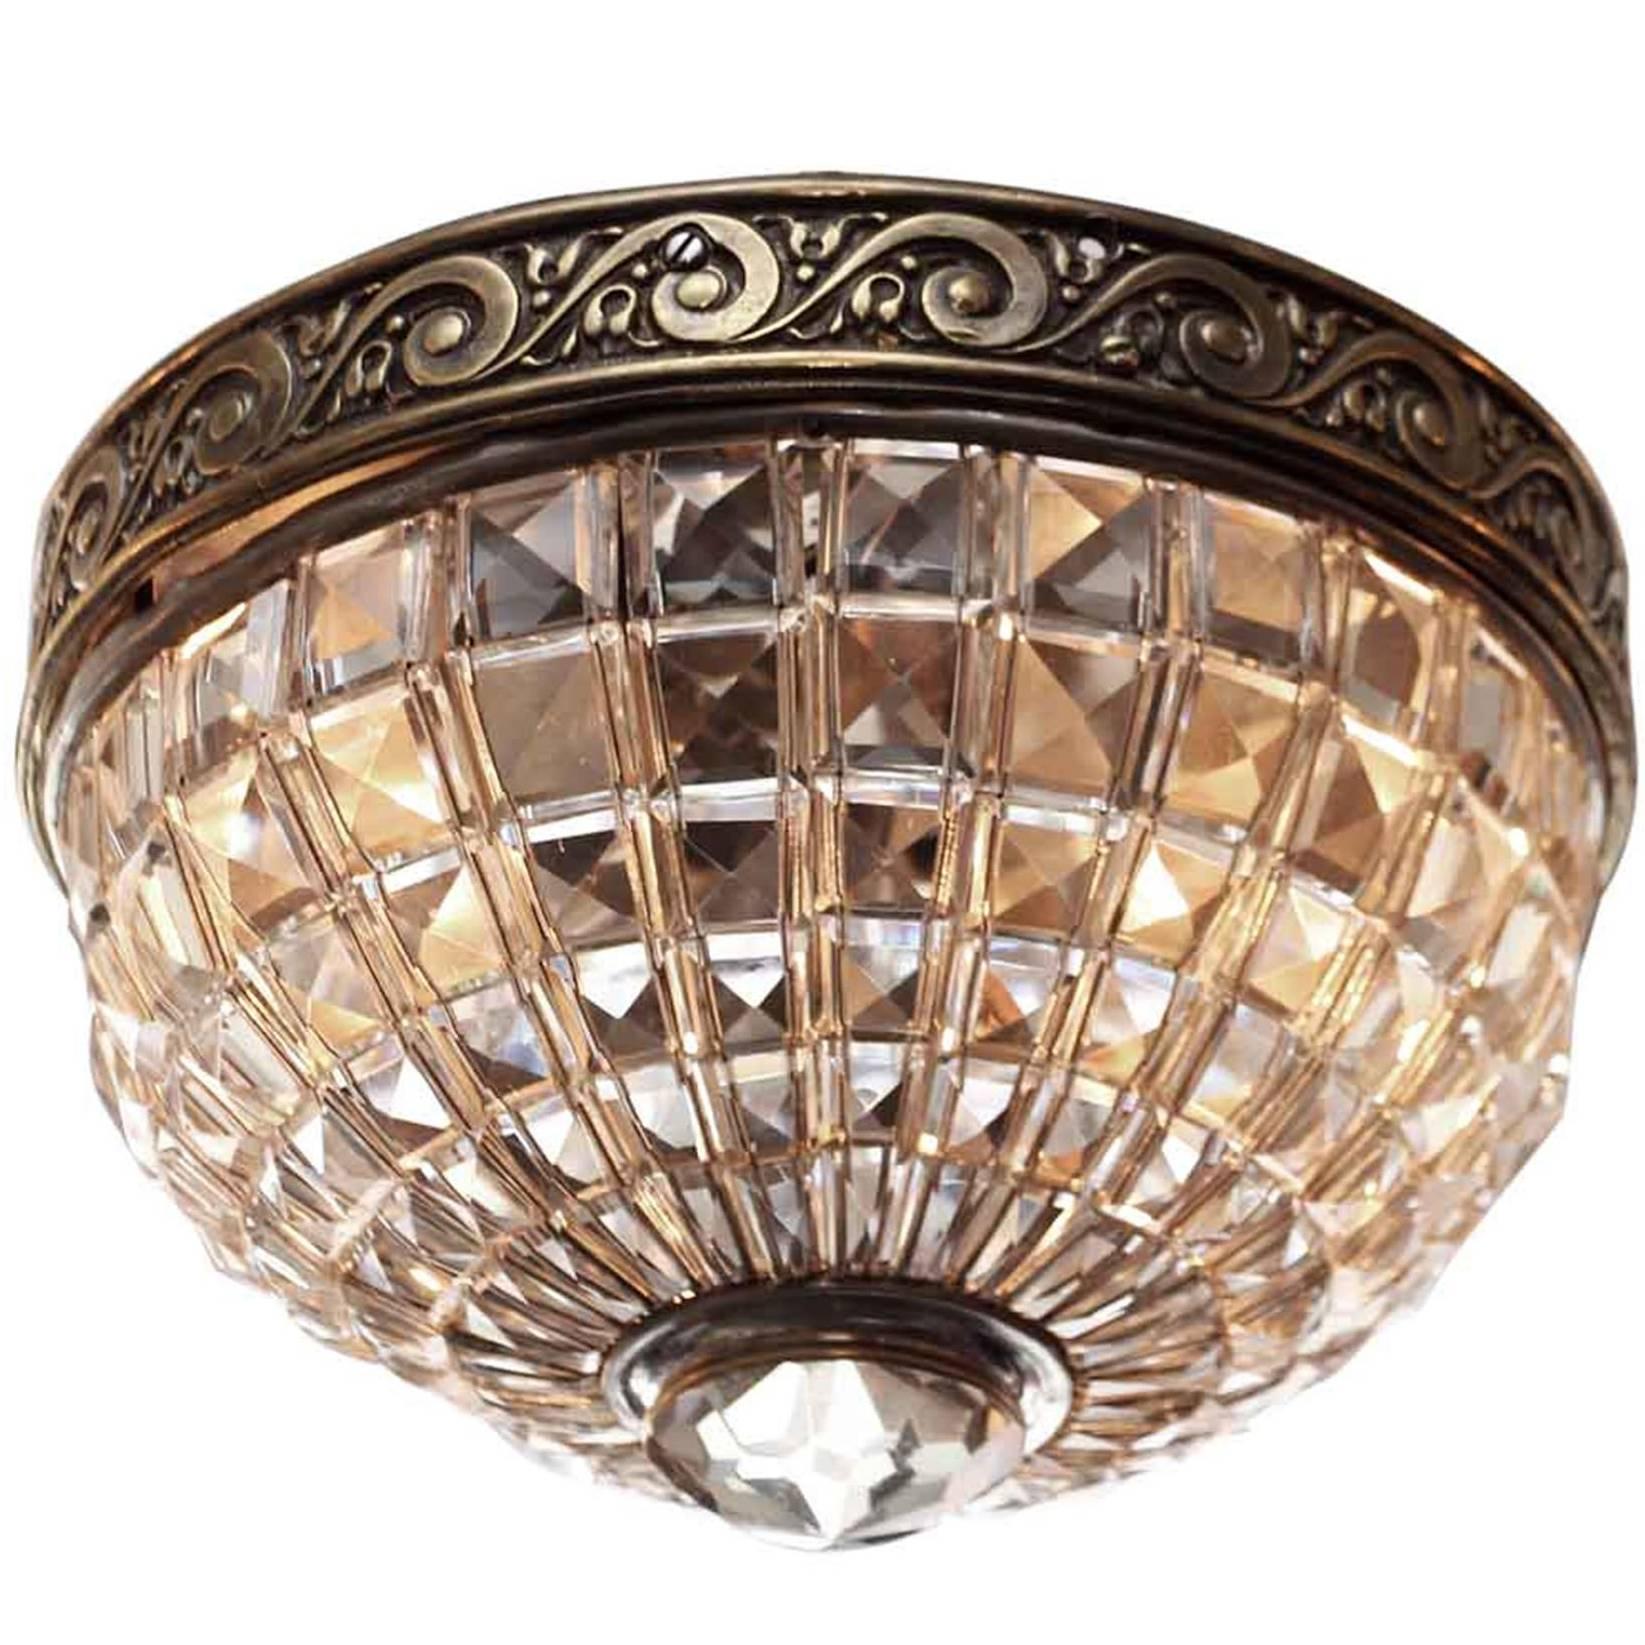 1930s Brass and Crystal Basket Flush Mount Light with Two Lights